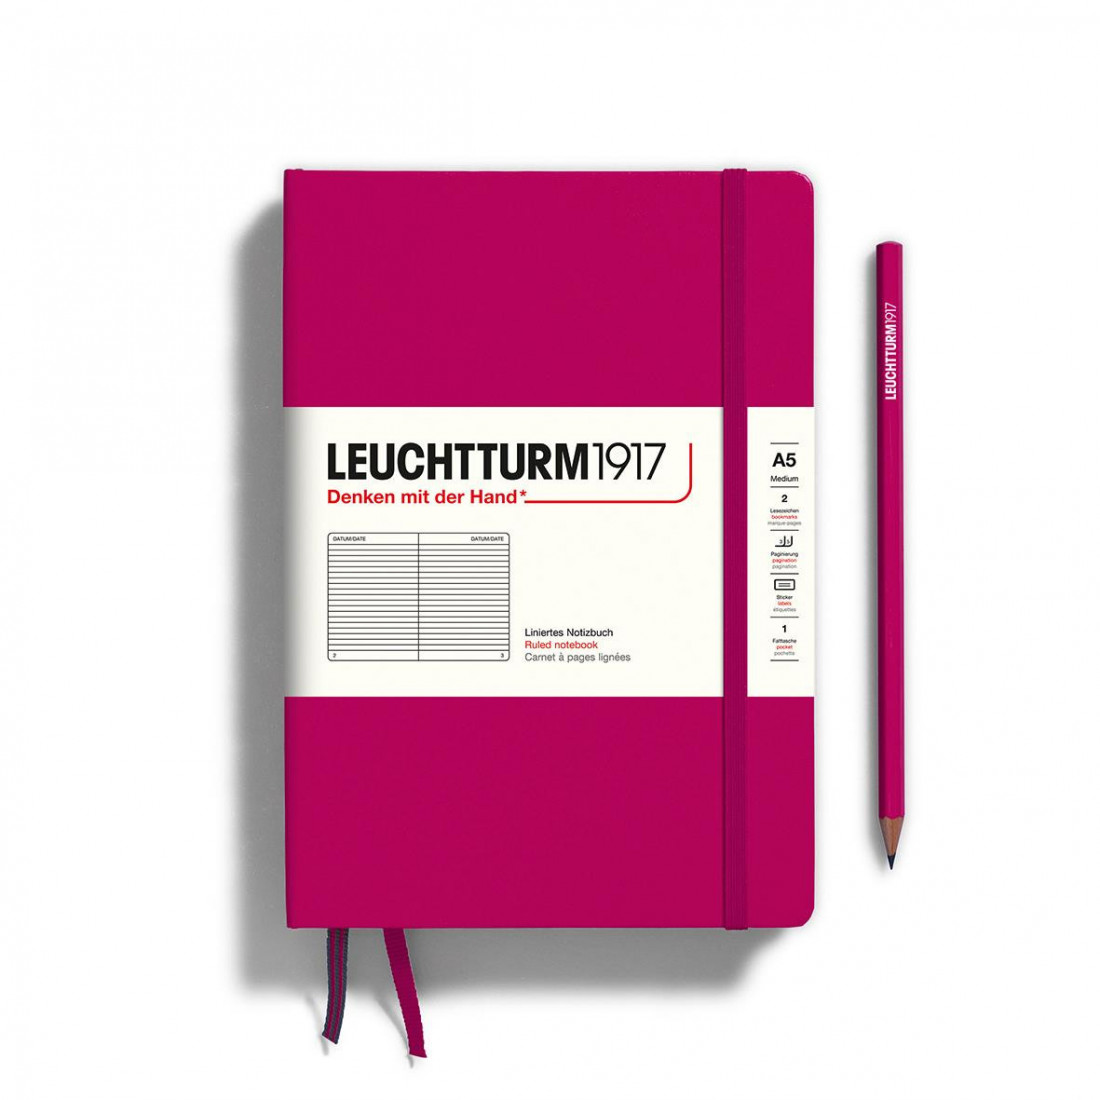 Leuchtturm 1917 Notebook A5 Hardcover 251 numbered pages Berry ruled